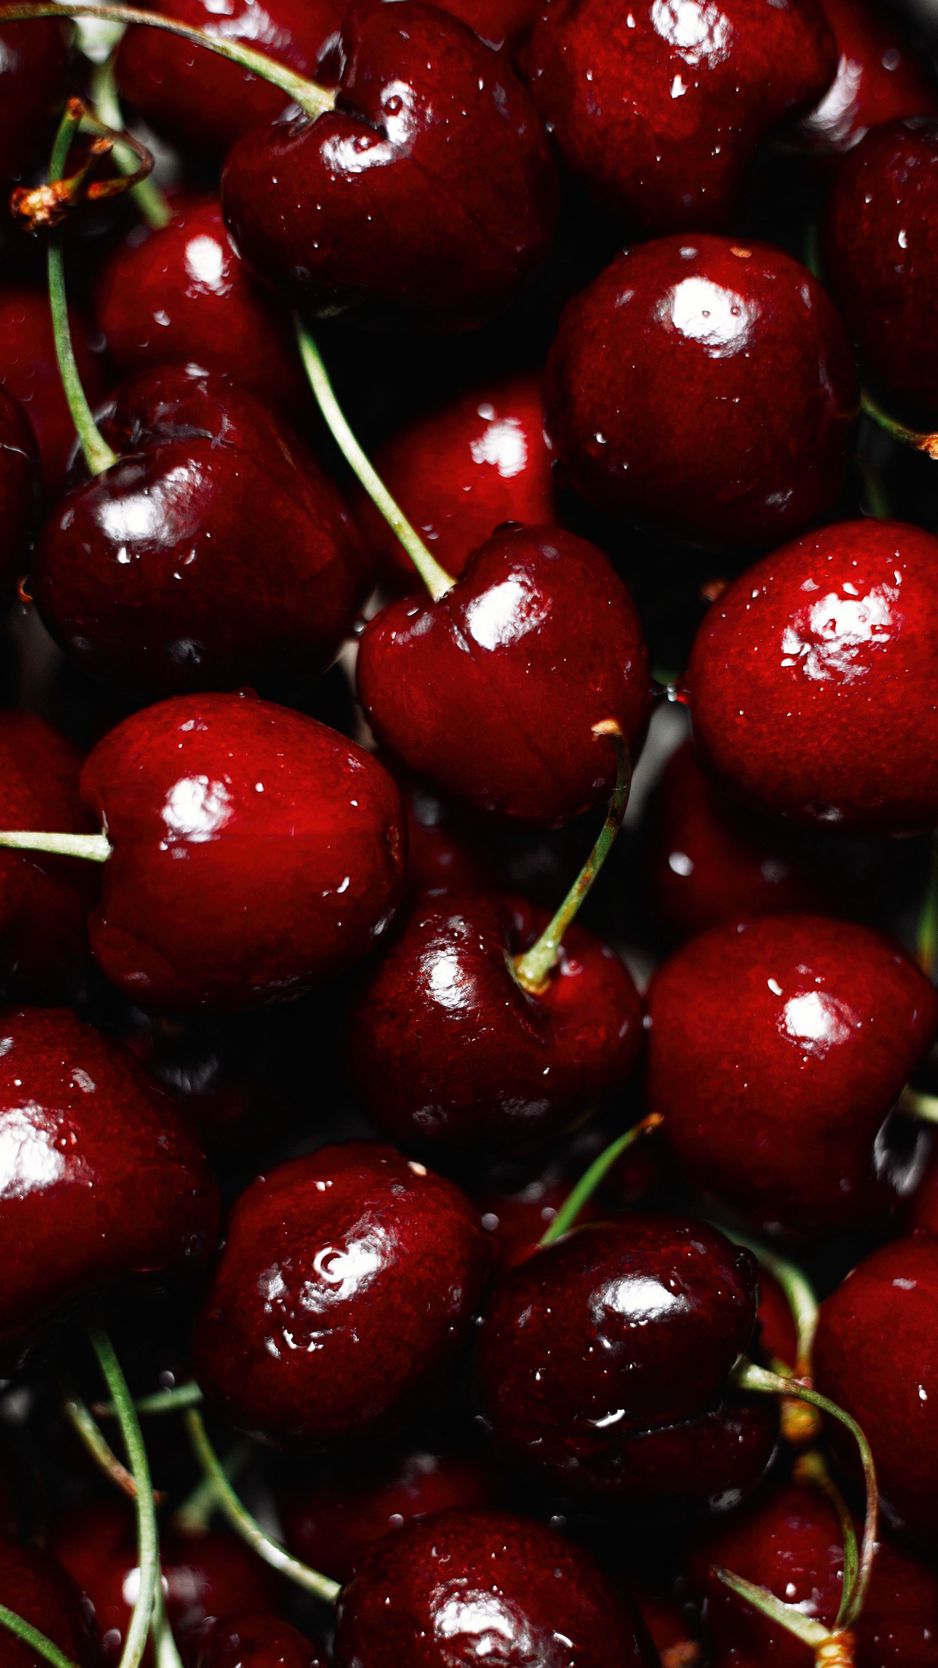 Download wallpaper 938x1668 cherries, berries, red, wet, ripe iphone  8/7/6s/6 for parallax hd background